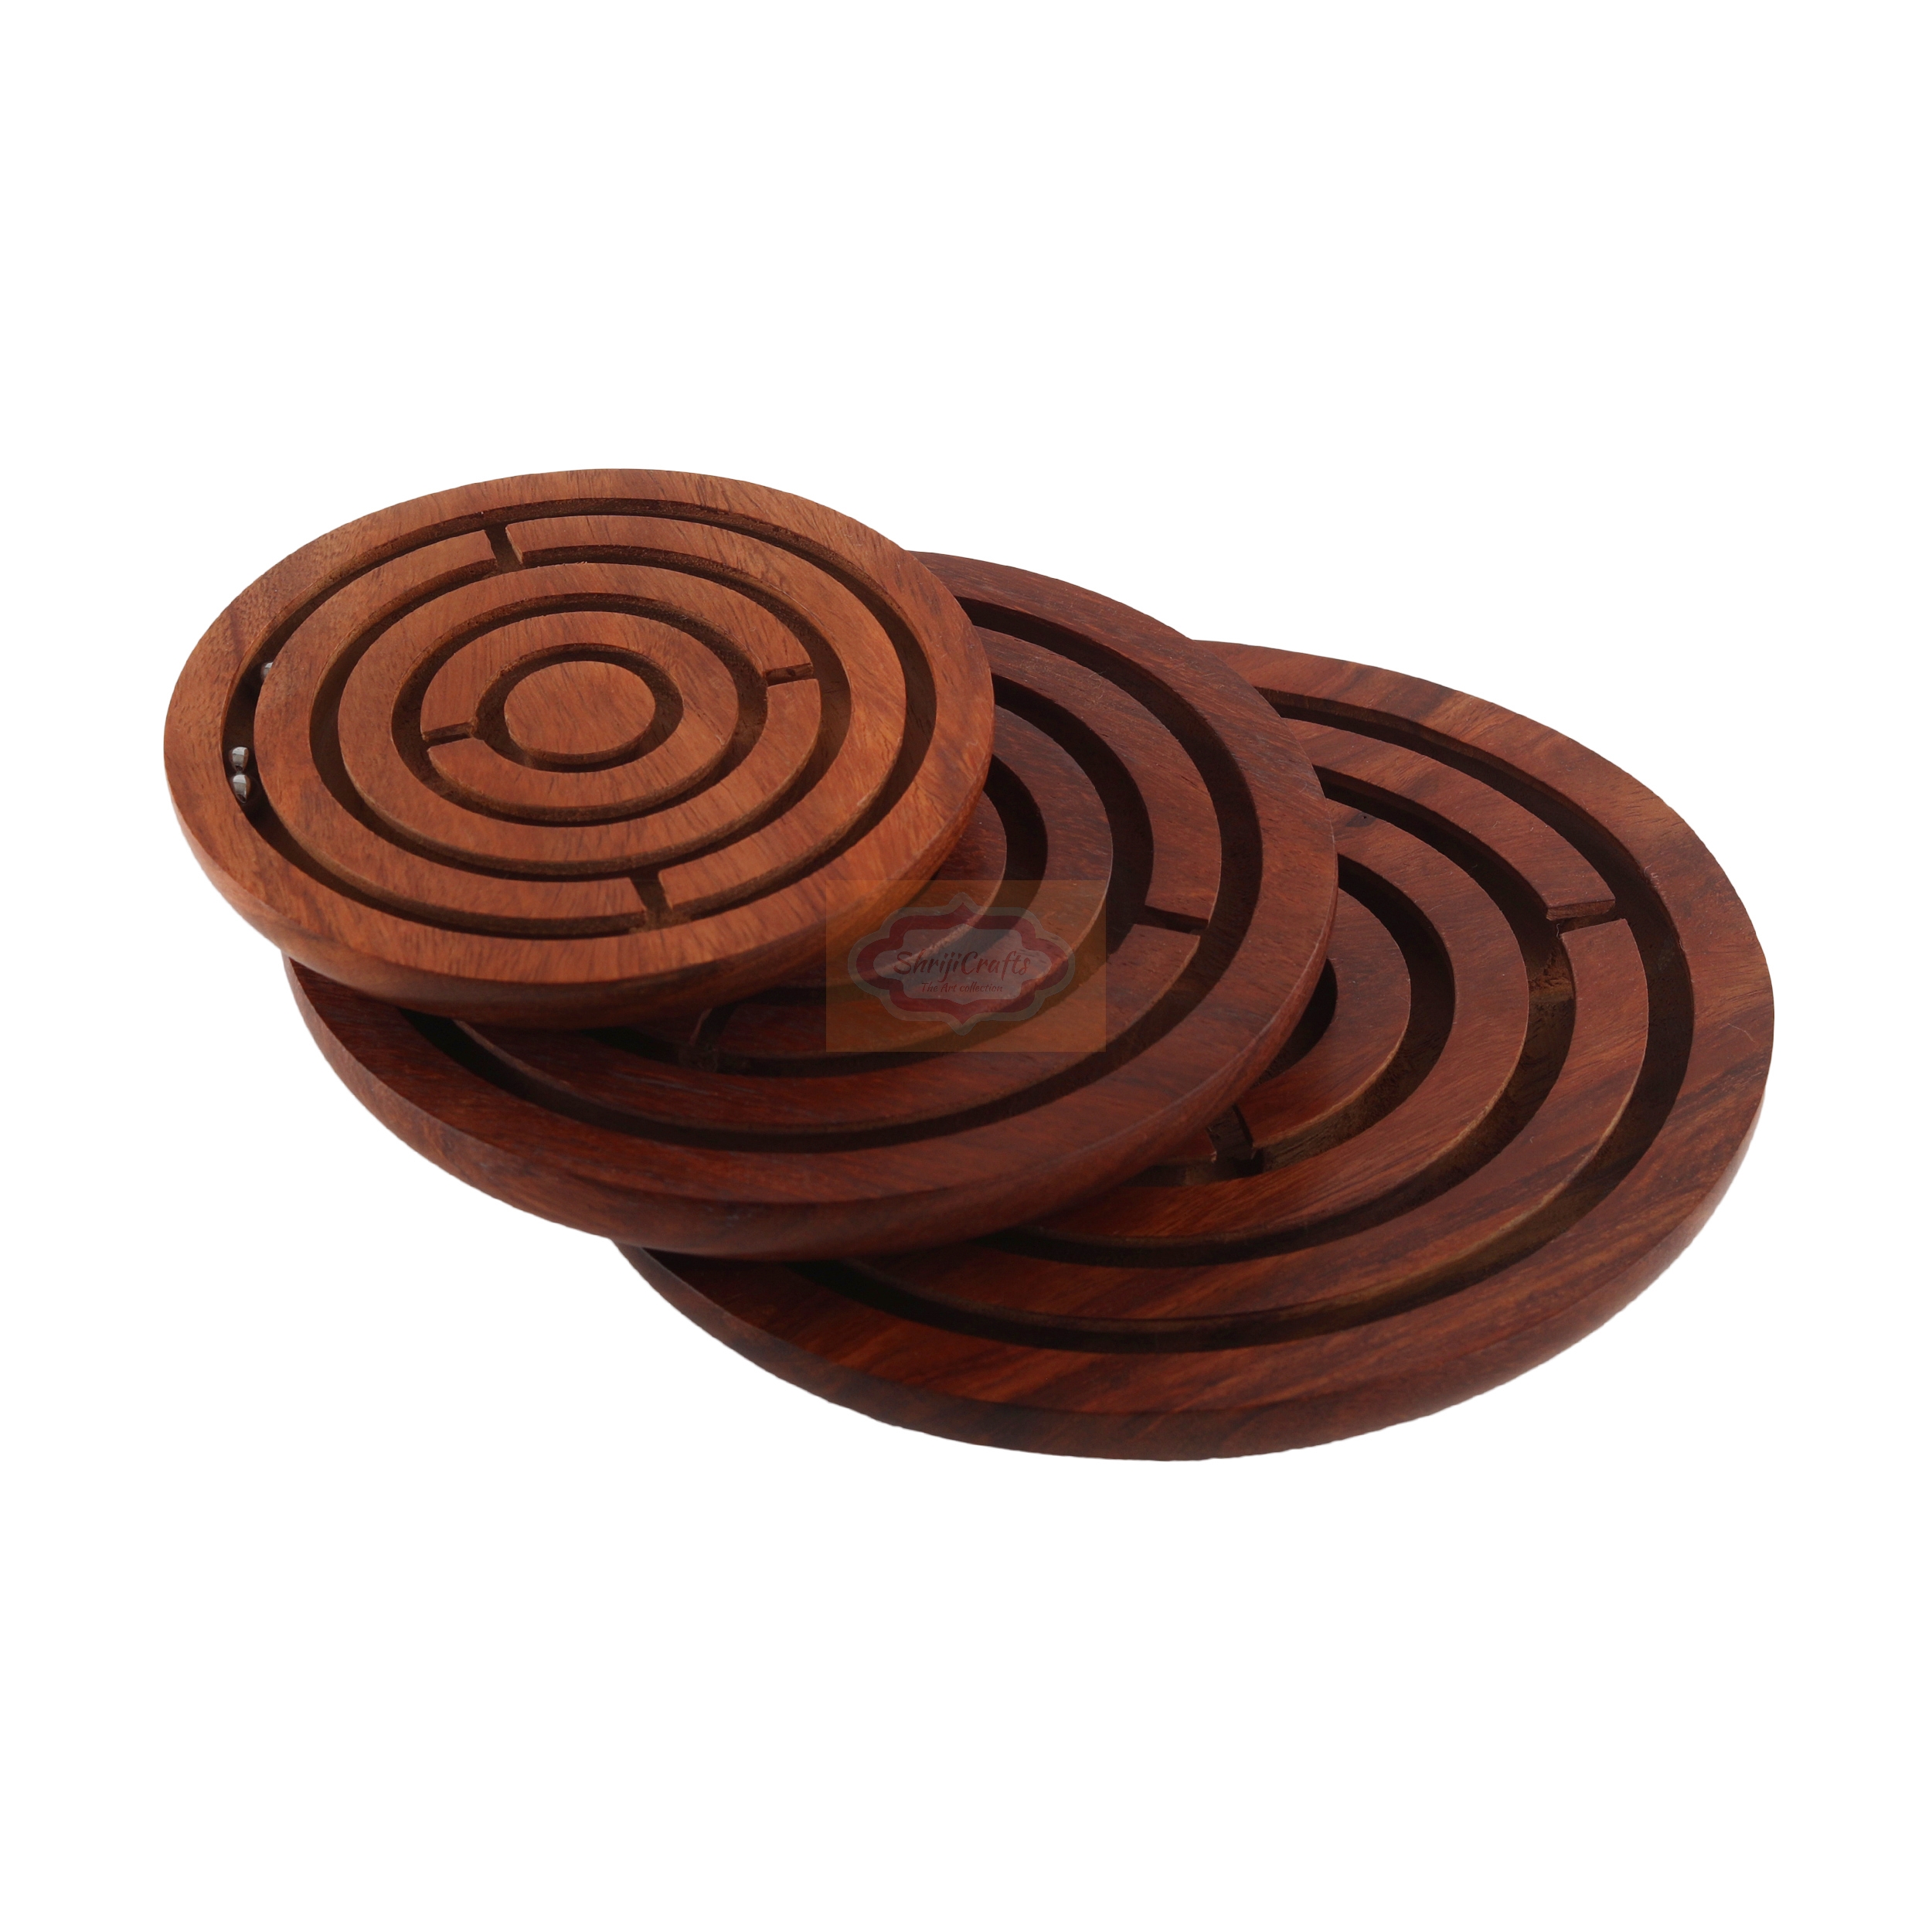 Shrijicrafts | ShrijiCrafts Wooden Labyrinth Ball-in-a-Maze Puzzle Game (Dia - 4 Inches) 1